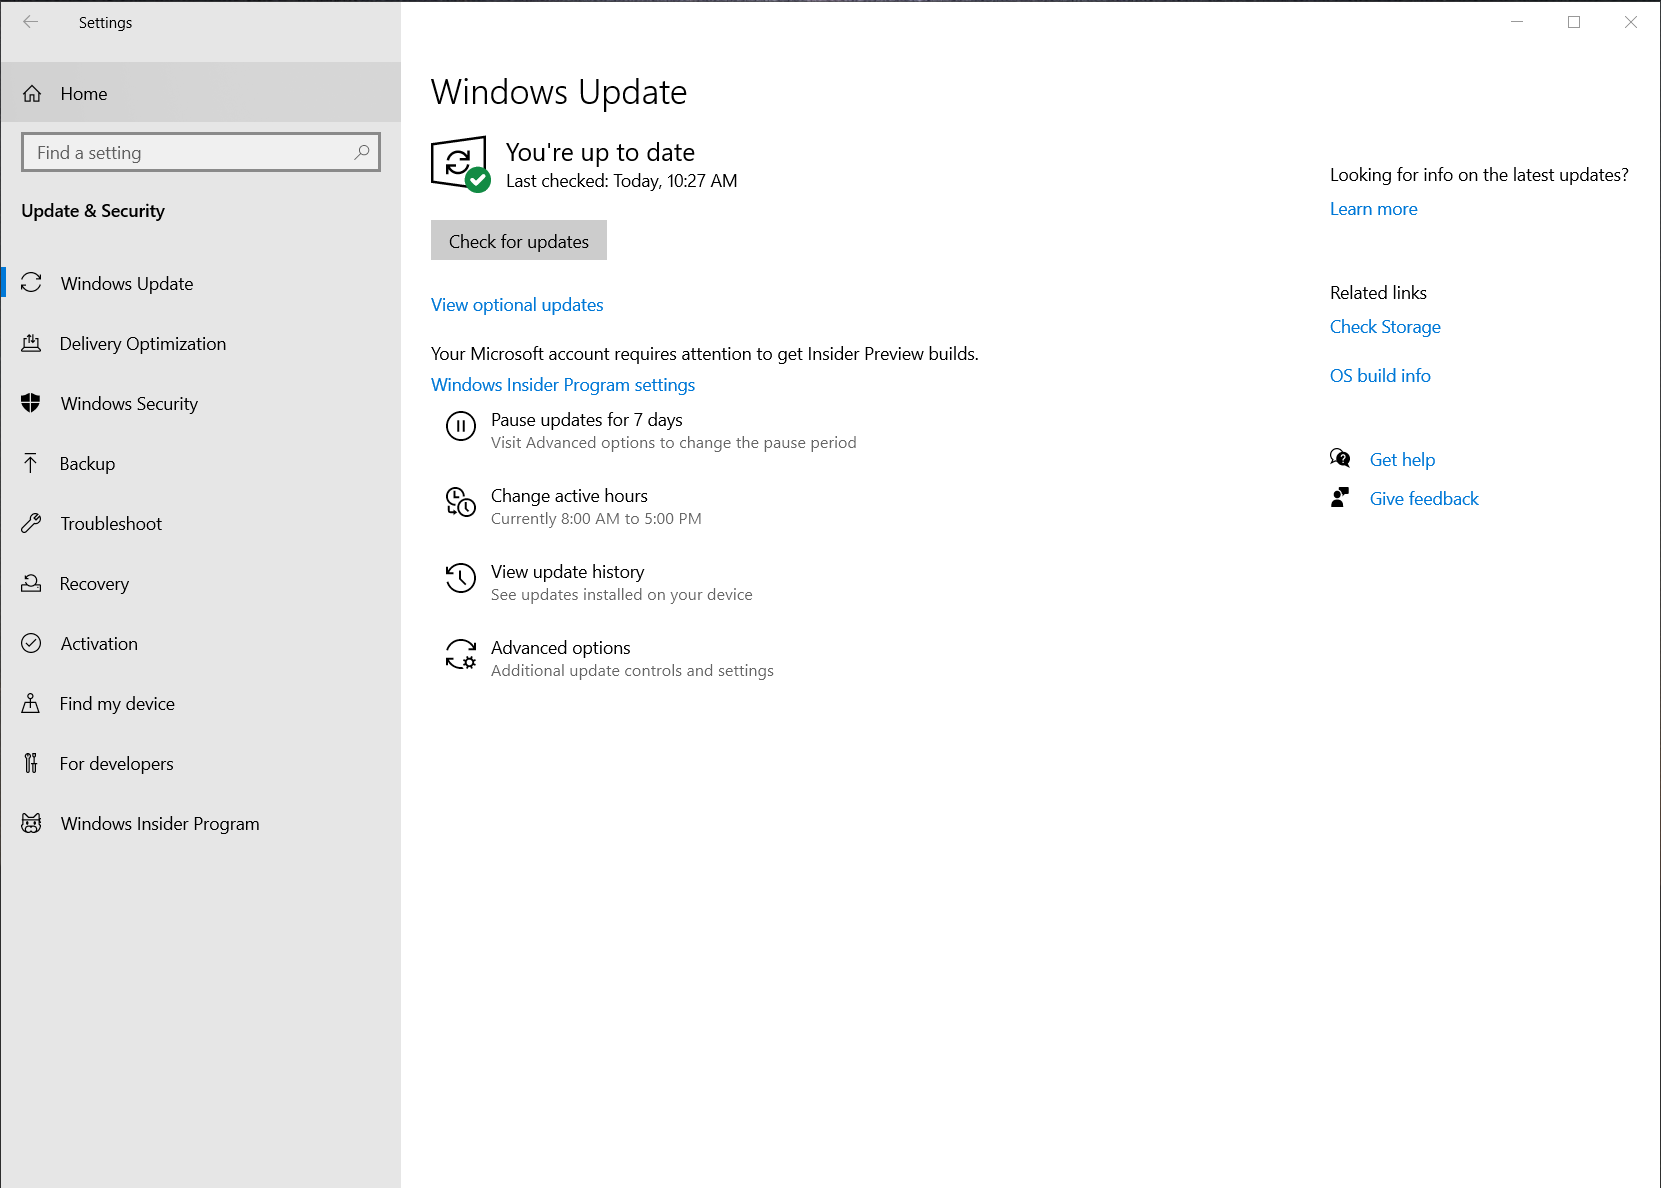 View optional updates option in the Windows Update section of Update & Security Settings.